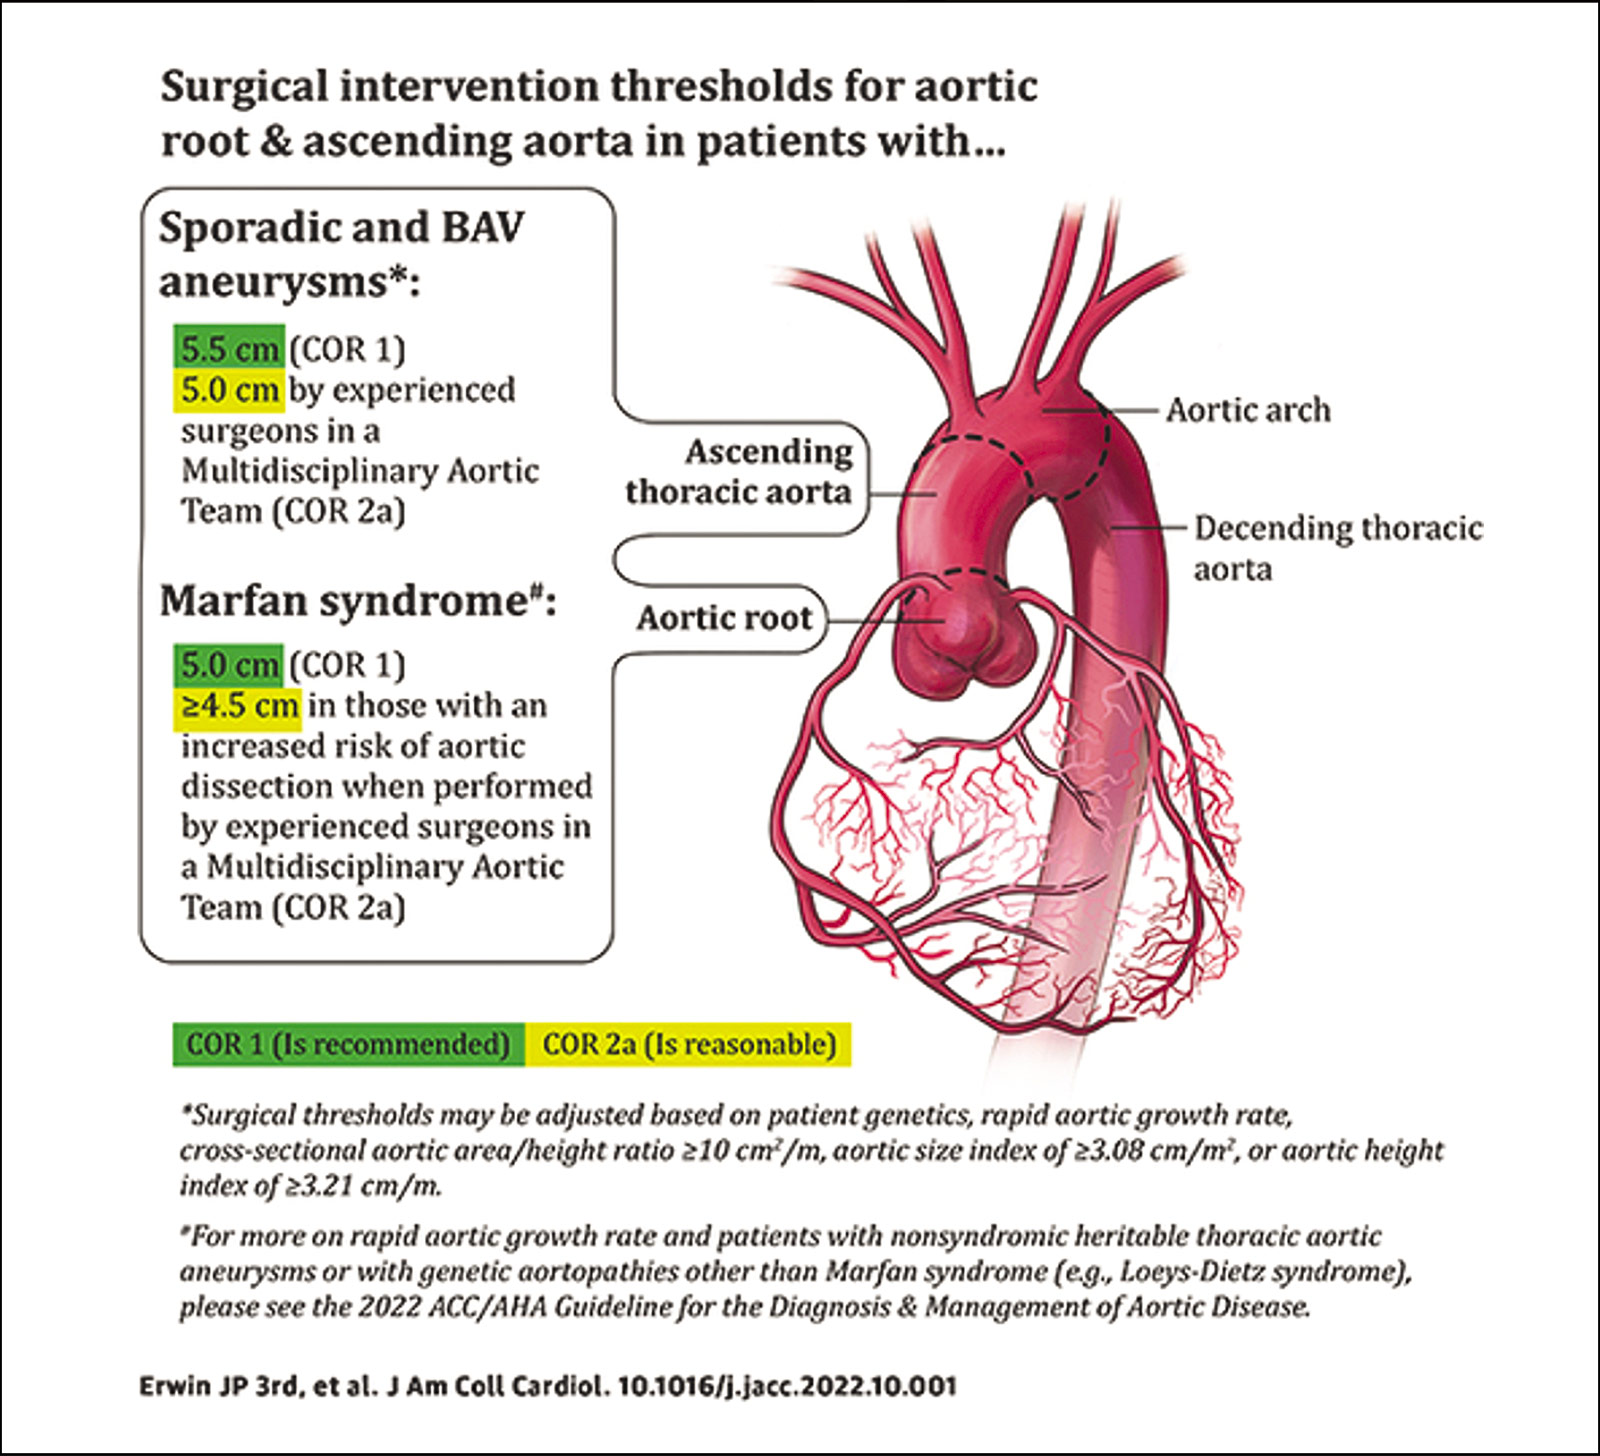 Diagnosis, Management of Aortic Disease Focus of New ACC/AHA Guideline